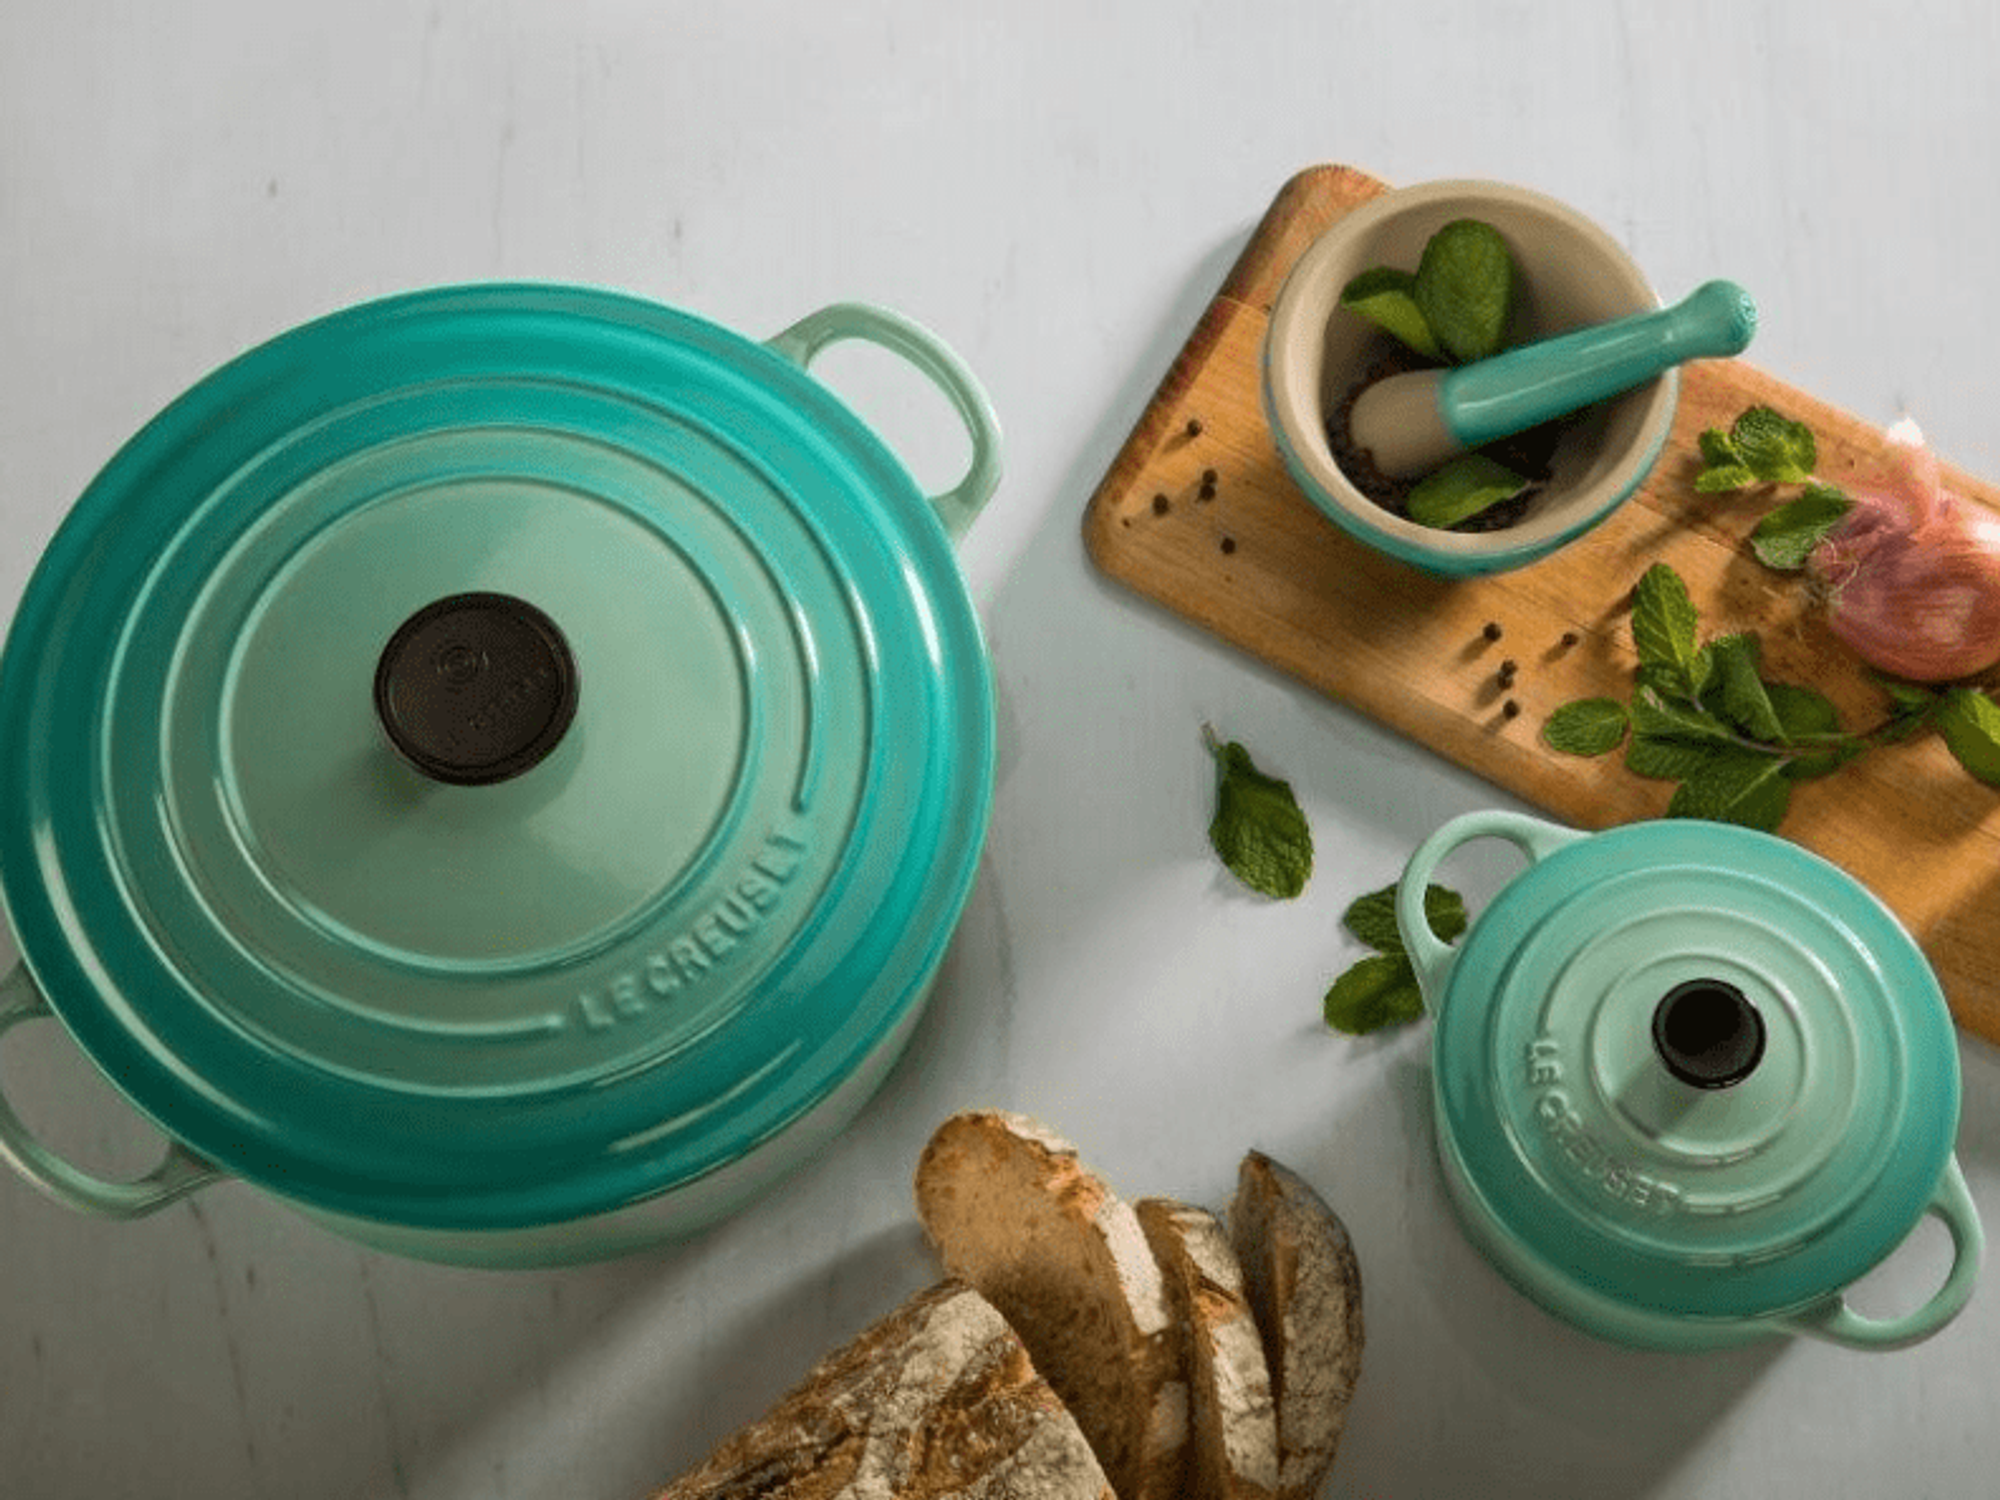 The Le Creuset Factory to Table sale is kicking off February 27 at Dallas Market Hall.